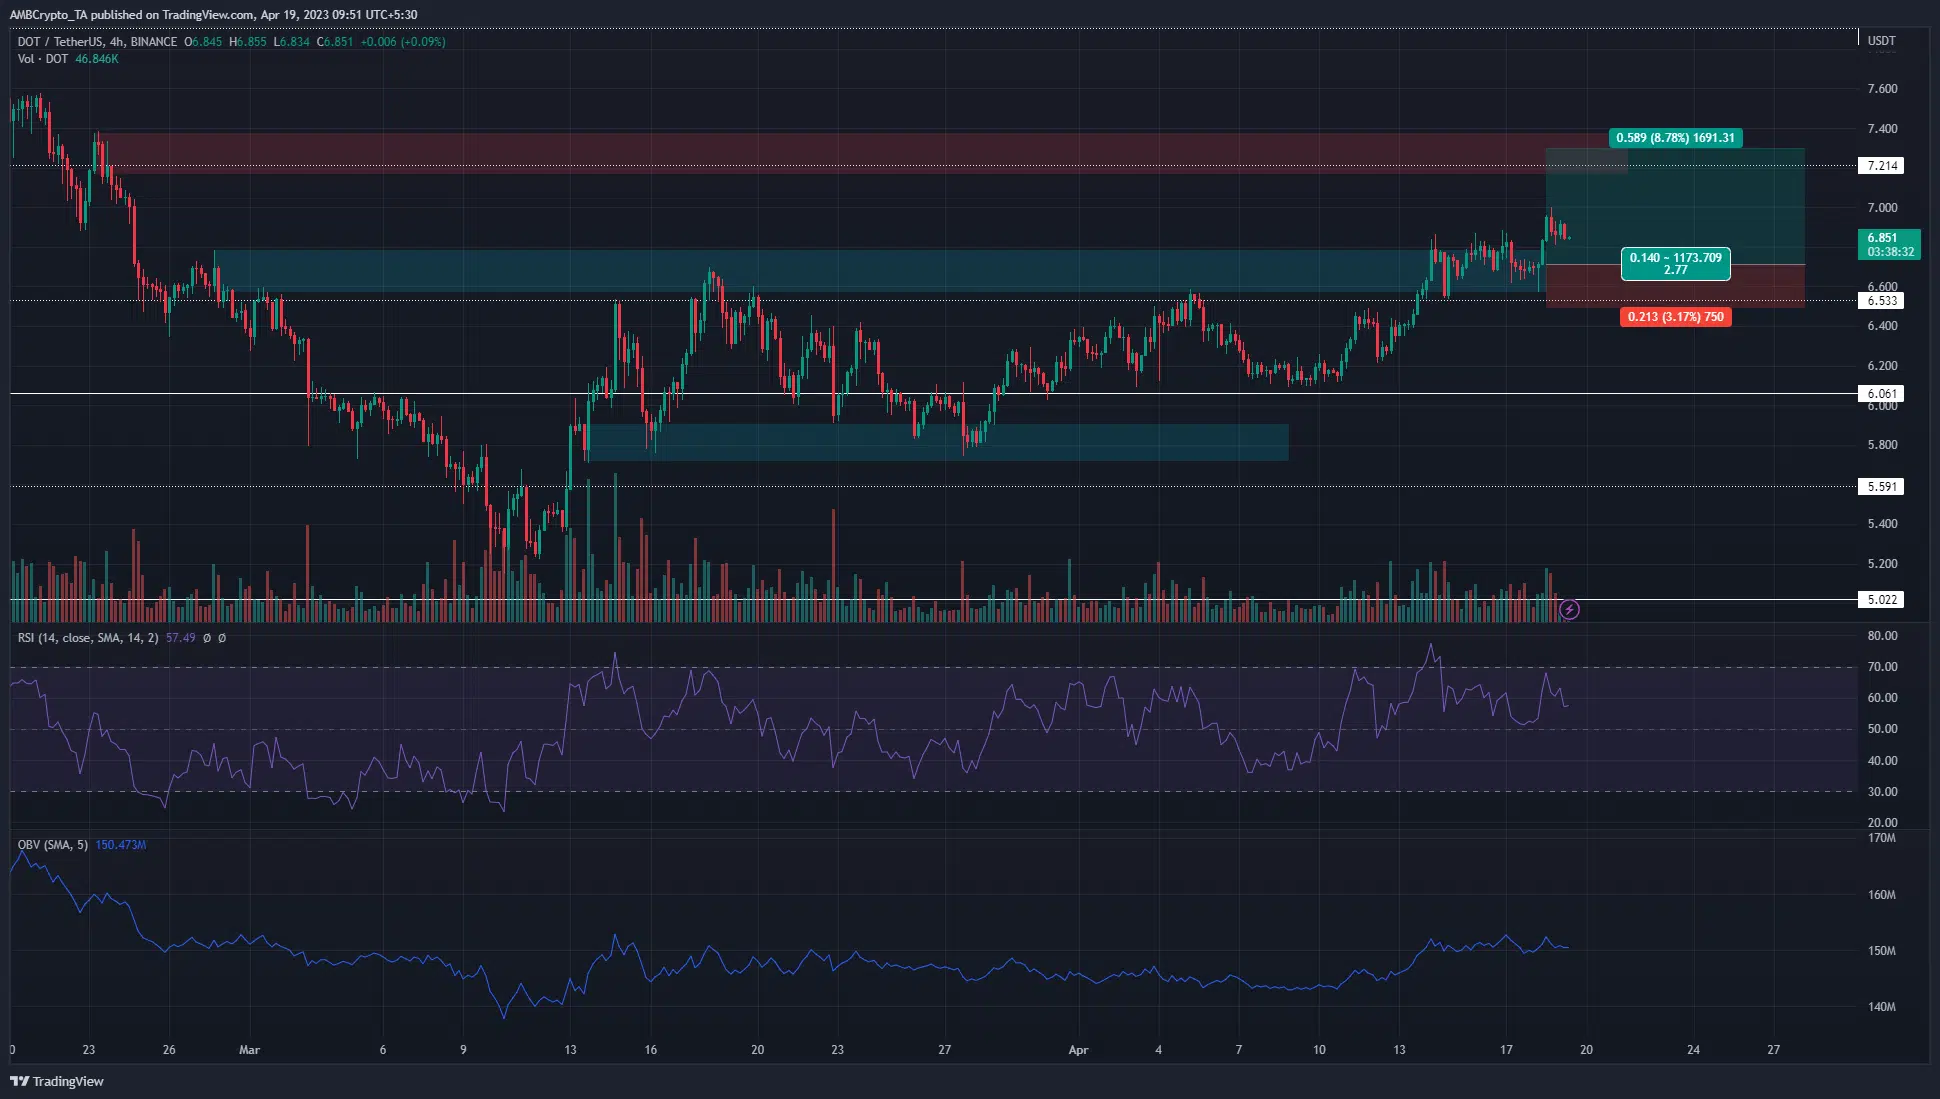 Polkadot has a bullish bias after breaking out of this resistance zone